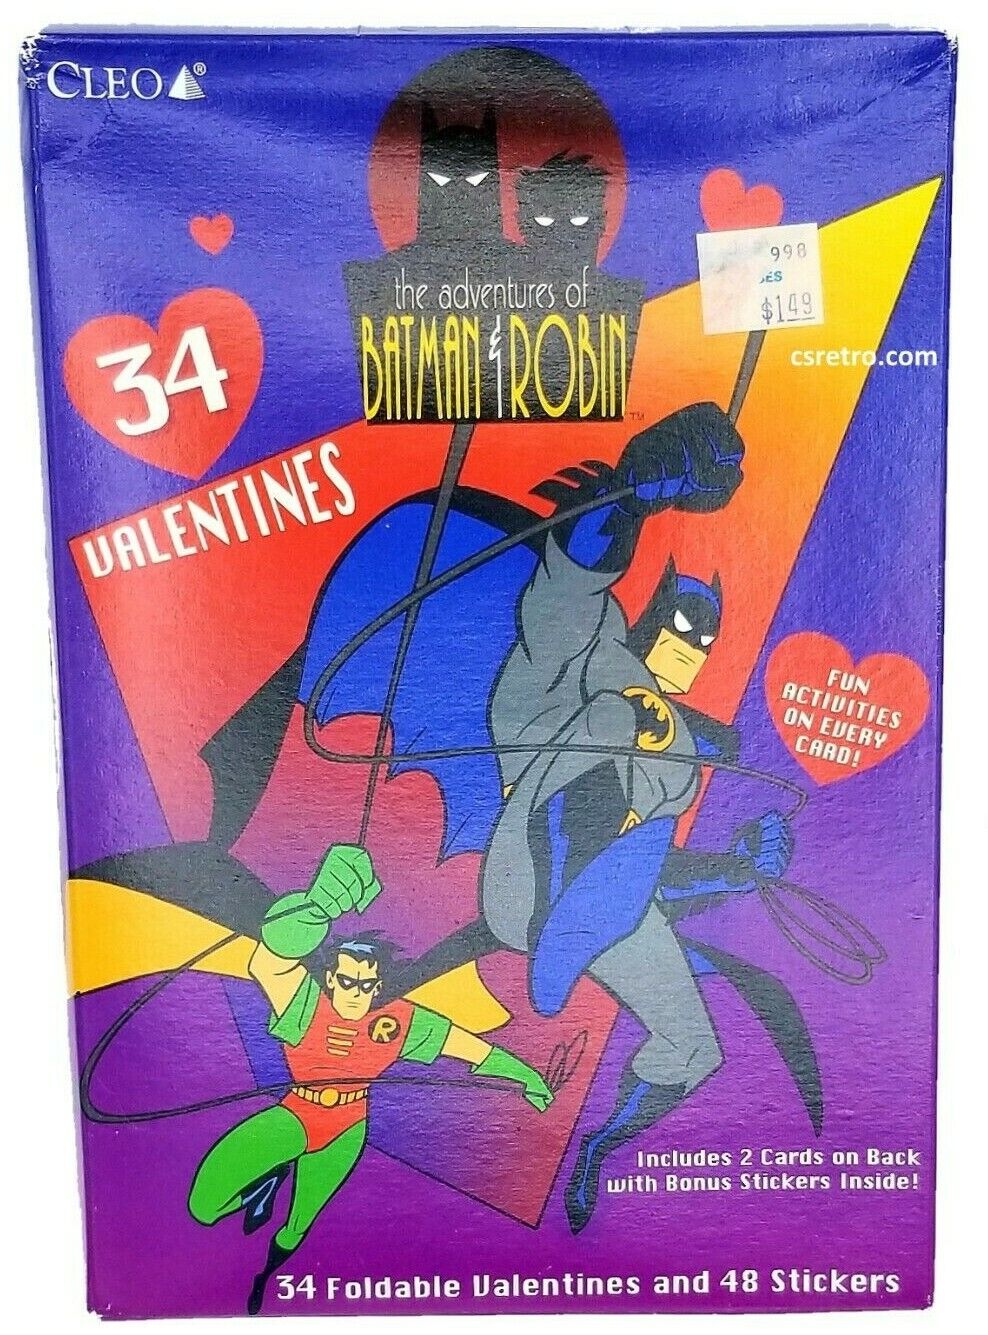 1996 Vintage Adventures of Batman and Robin VALENTINES CARDS Collectible - READ